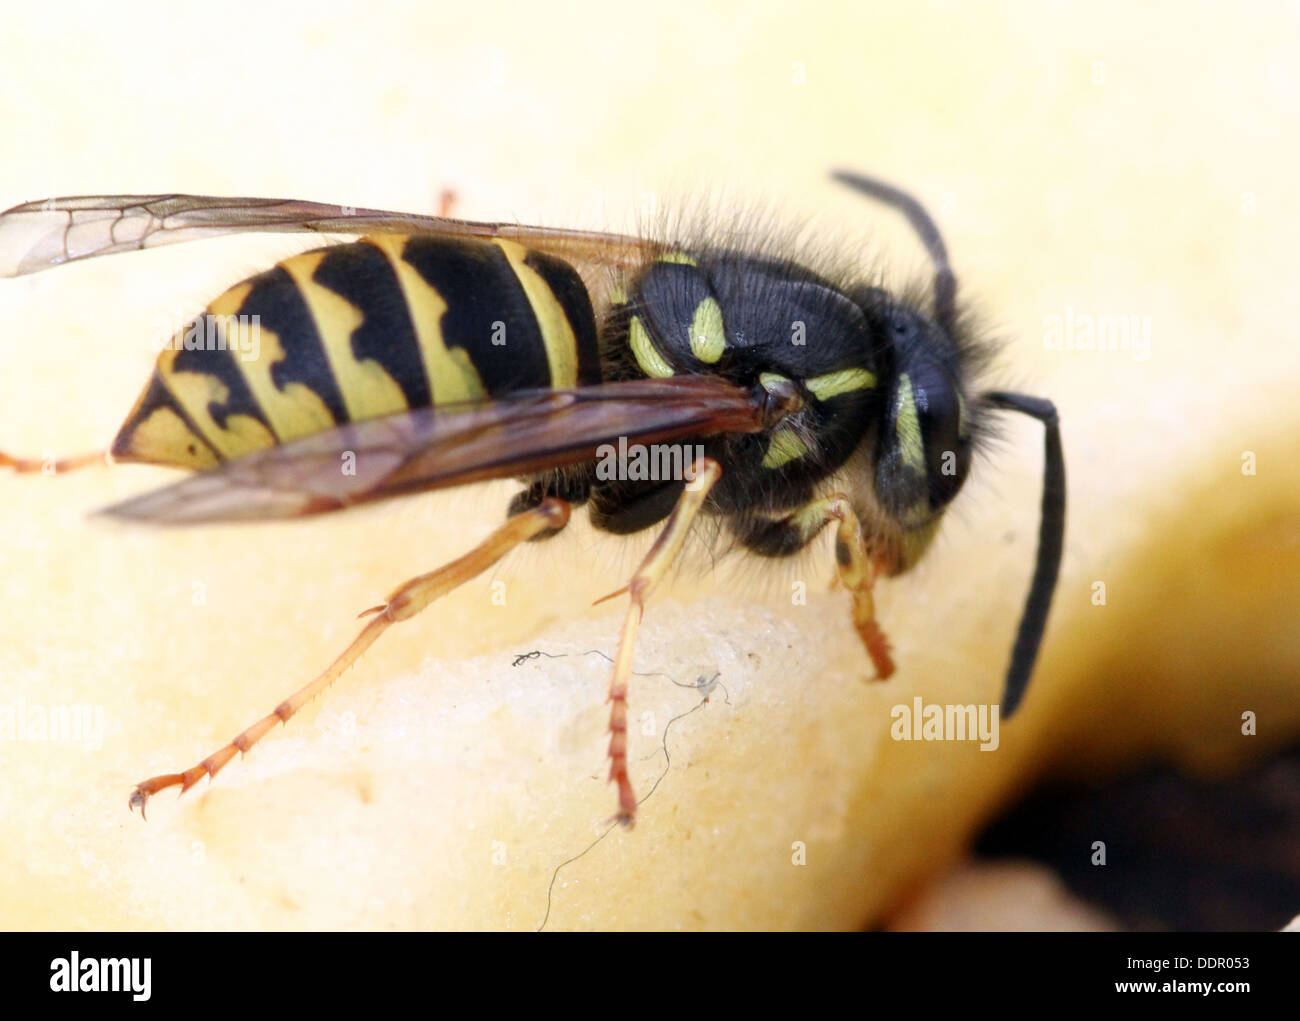 Common wasp ( Vespula vulgaris) feeding on fruit and on flowers (16 images in series) Stock Photo